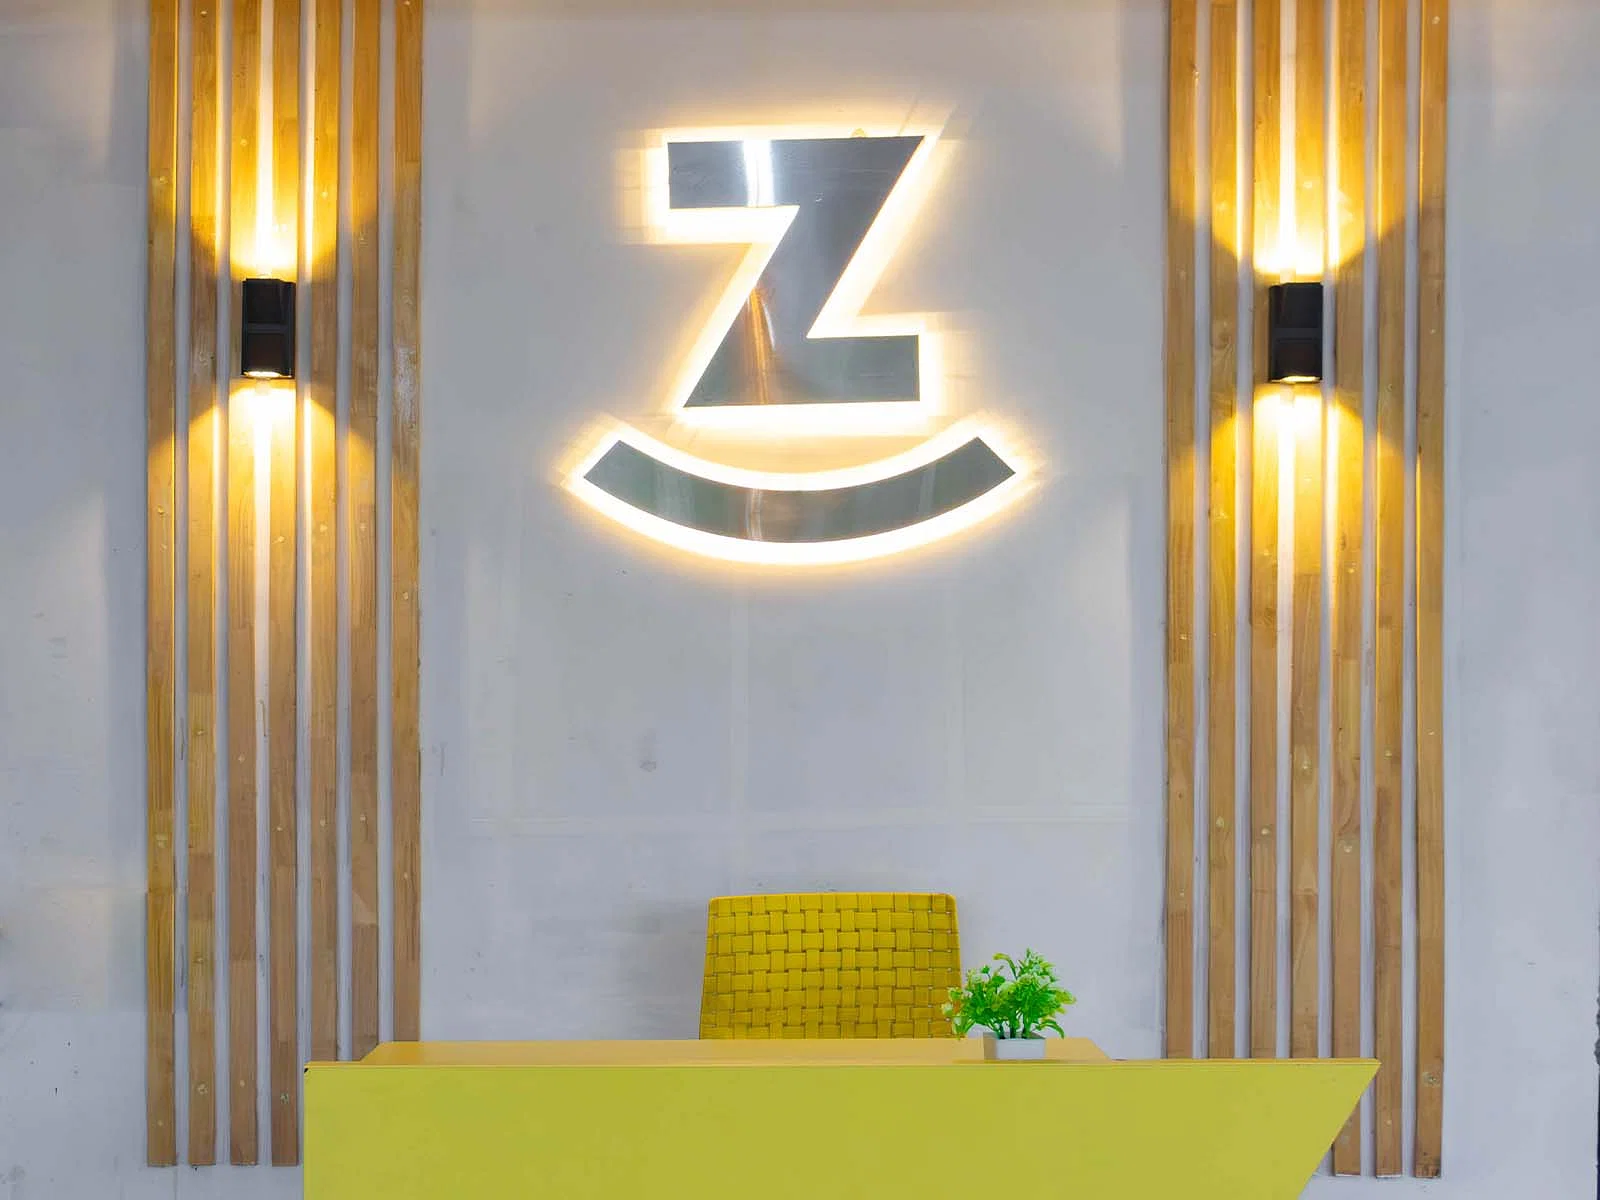 budget-friendly PGs and hostels for couple with single rooms with daily hopusekeeping-Zolo Fortuna